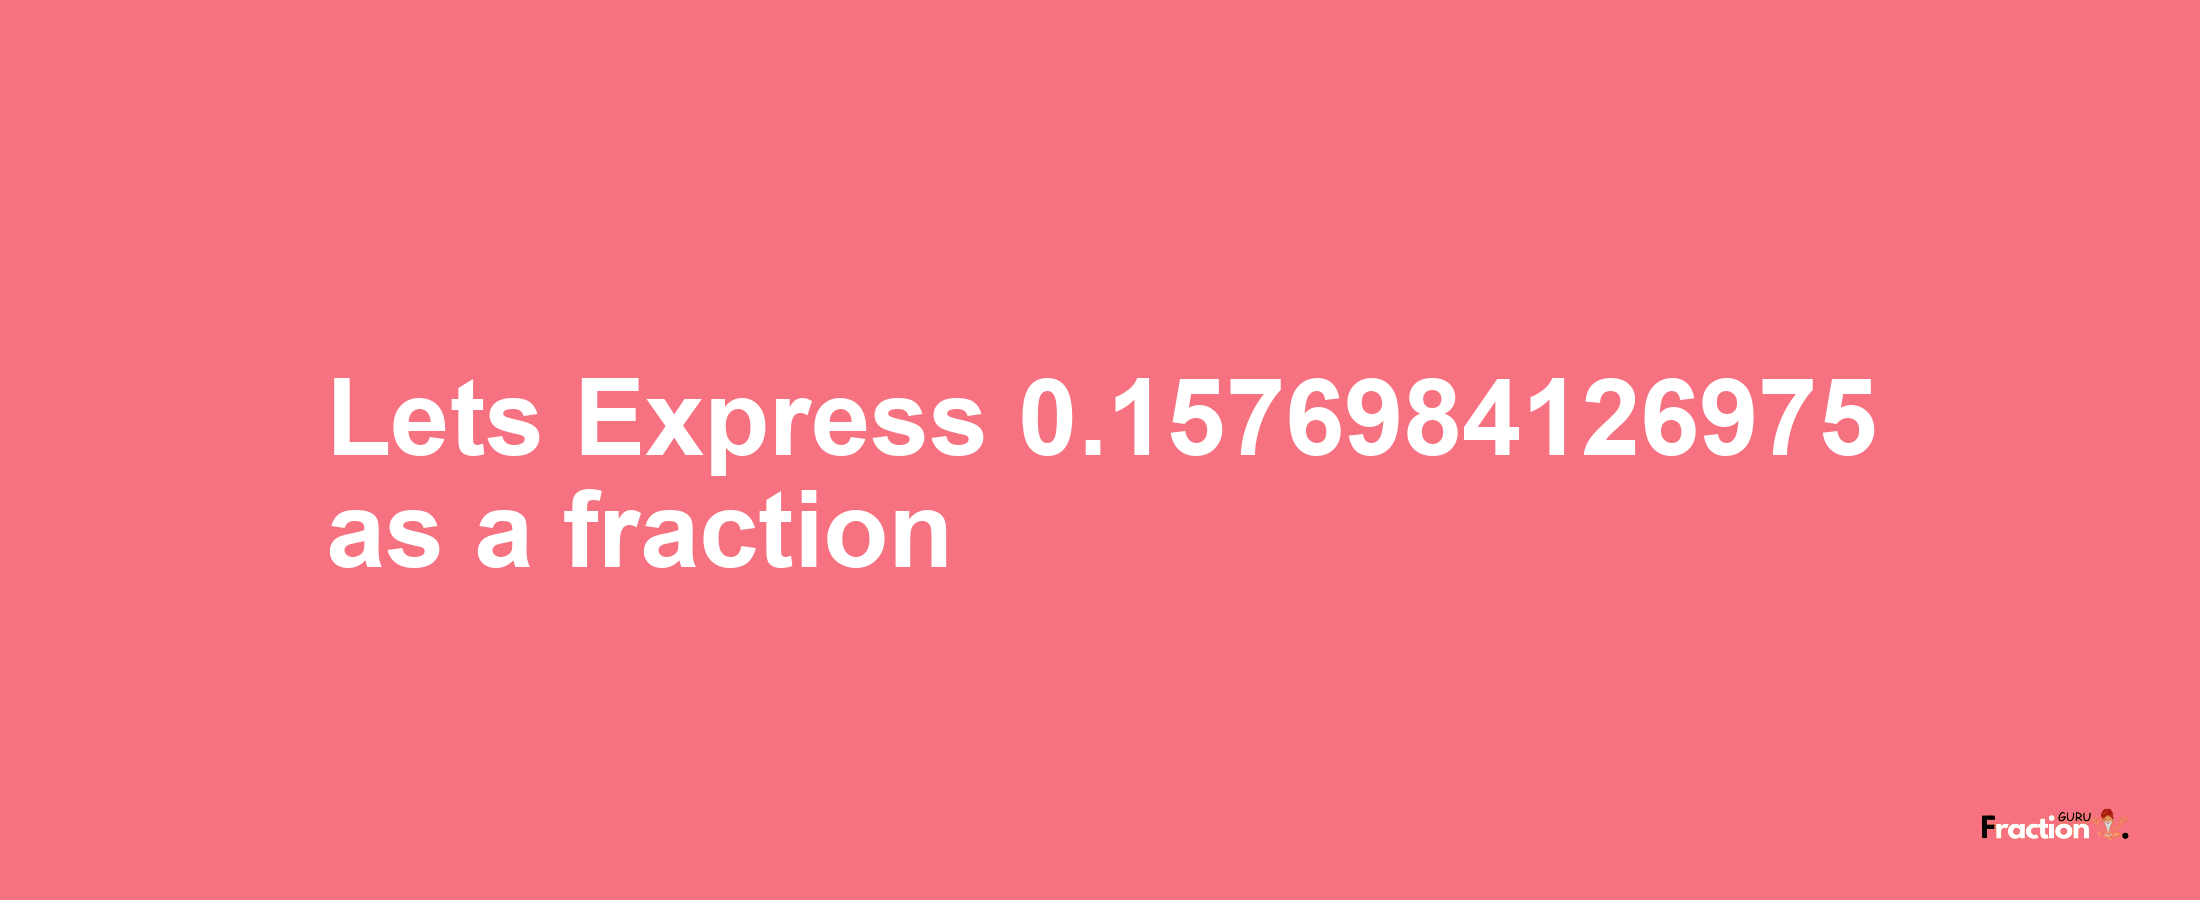 Lets Express 0.1576984126975 as afraction